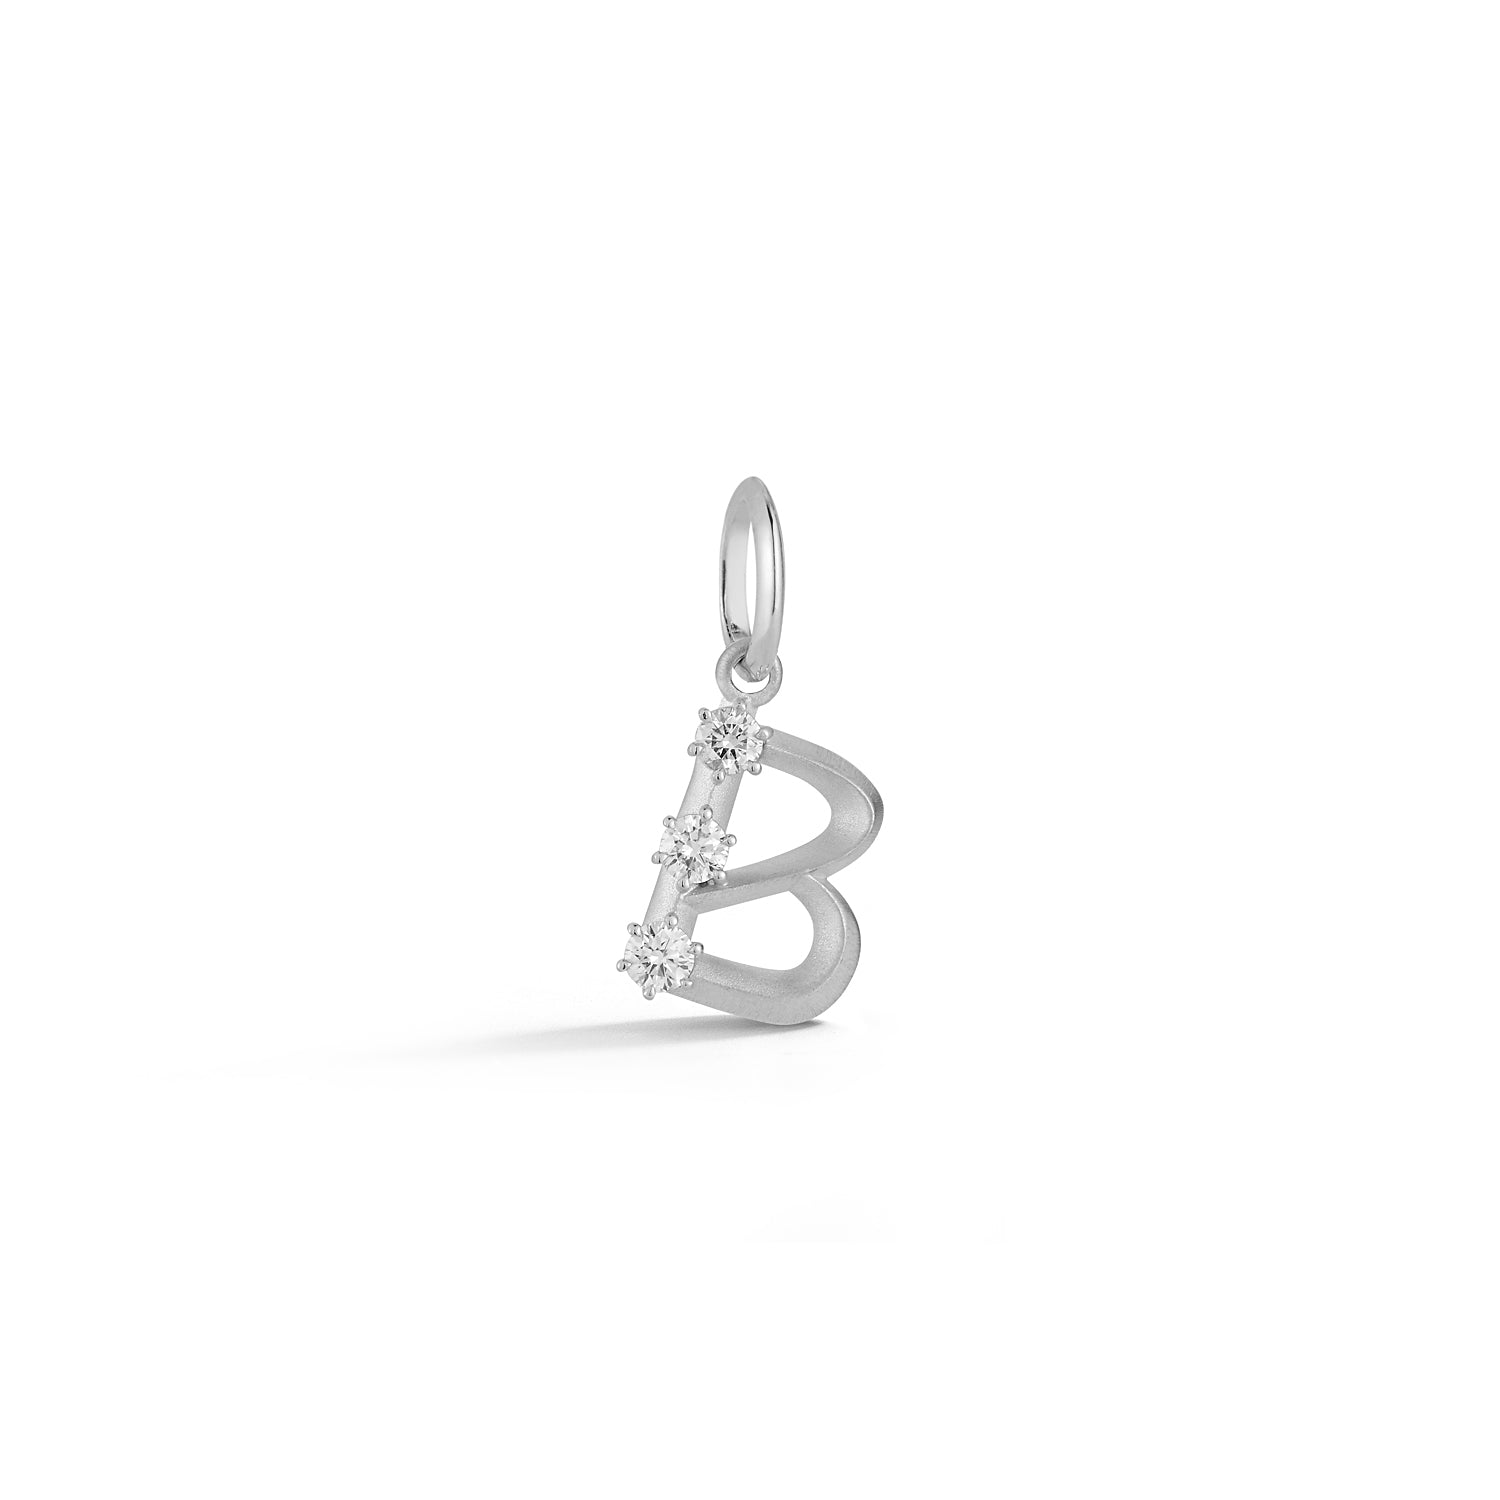 Sterling Silver Letter Charms - A-Z Letter Pendant- Charm with Clasp - Charm  Bracelet Charm- Add on Charm .